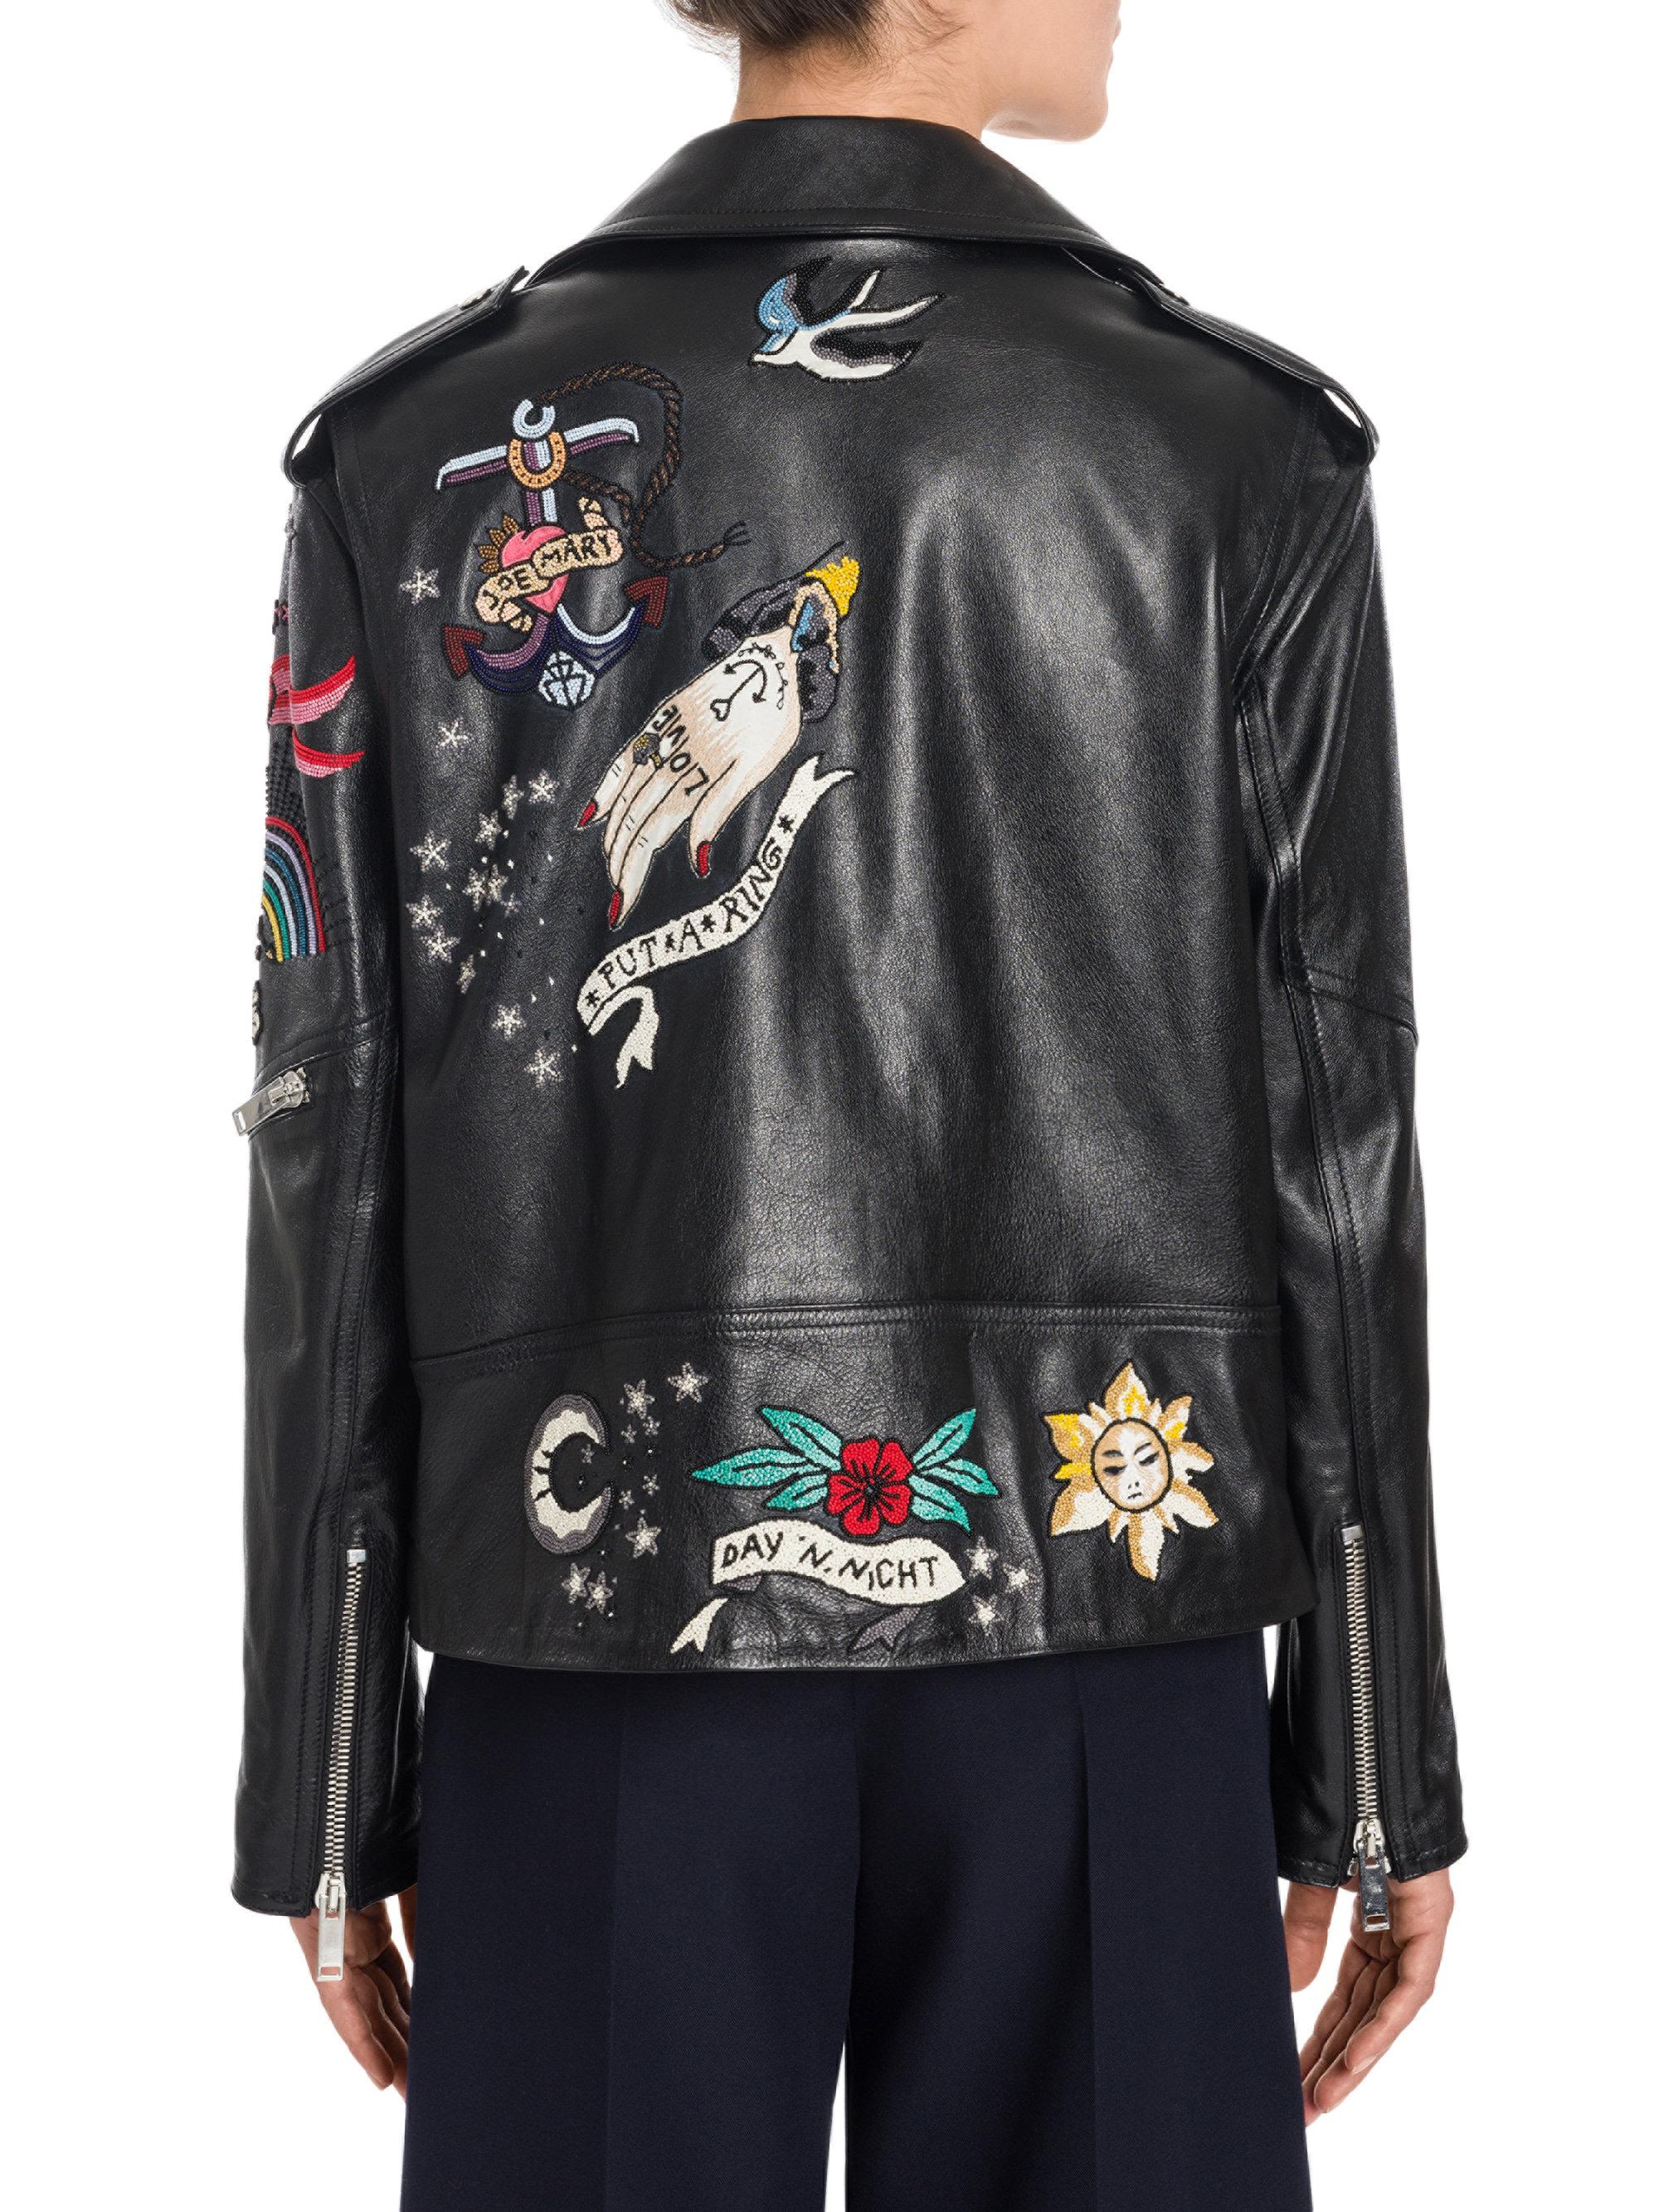 Valentino Tattoo Embroidered Leather Biker Jacket in Black - Lyst